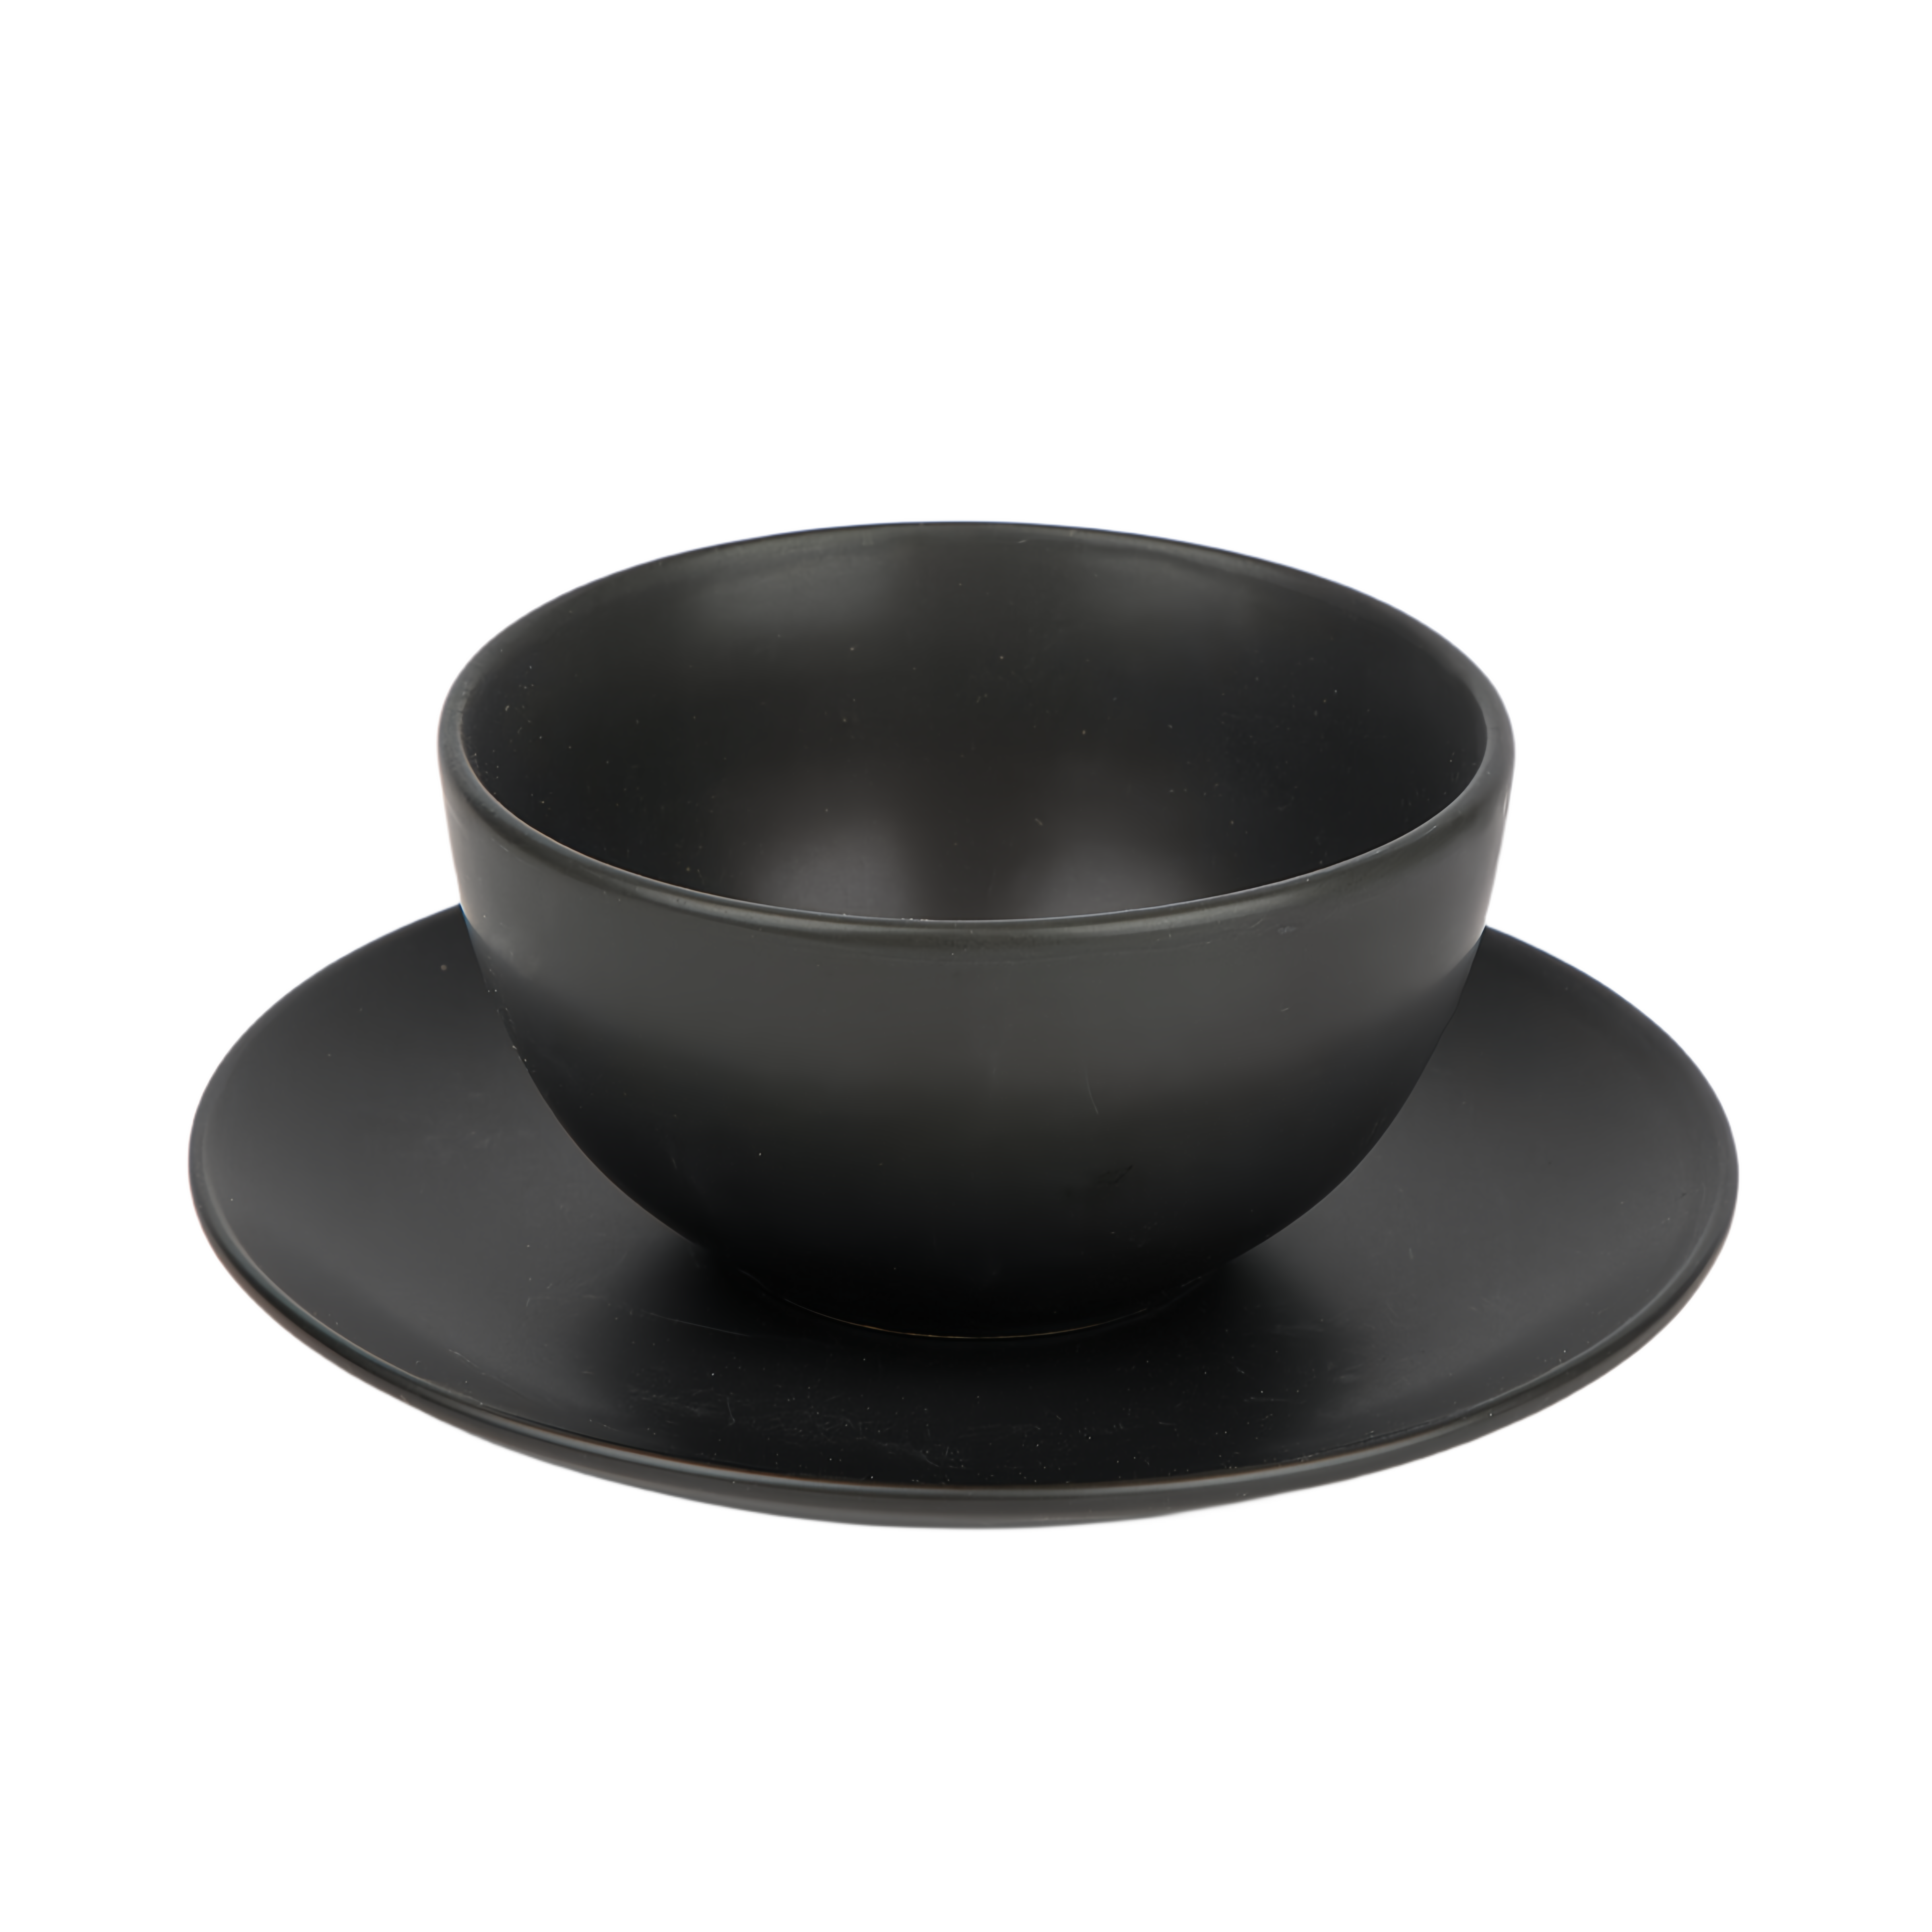 qinge Kitchen Supplies Black Ceramic Bowl and Plate Set Factory Prices